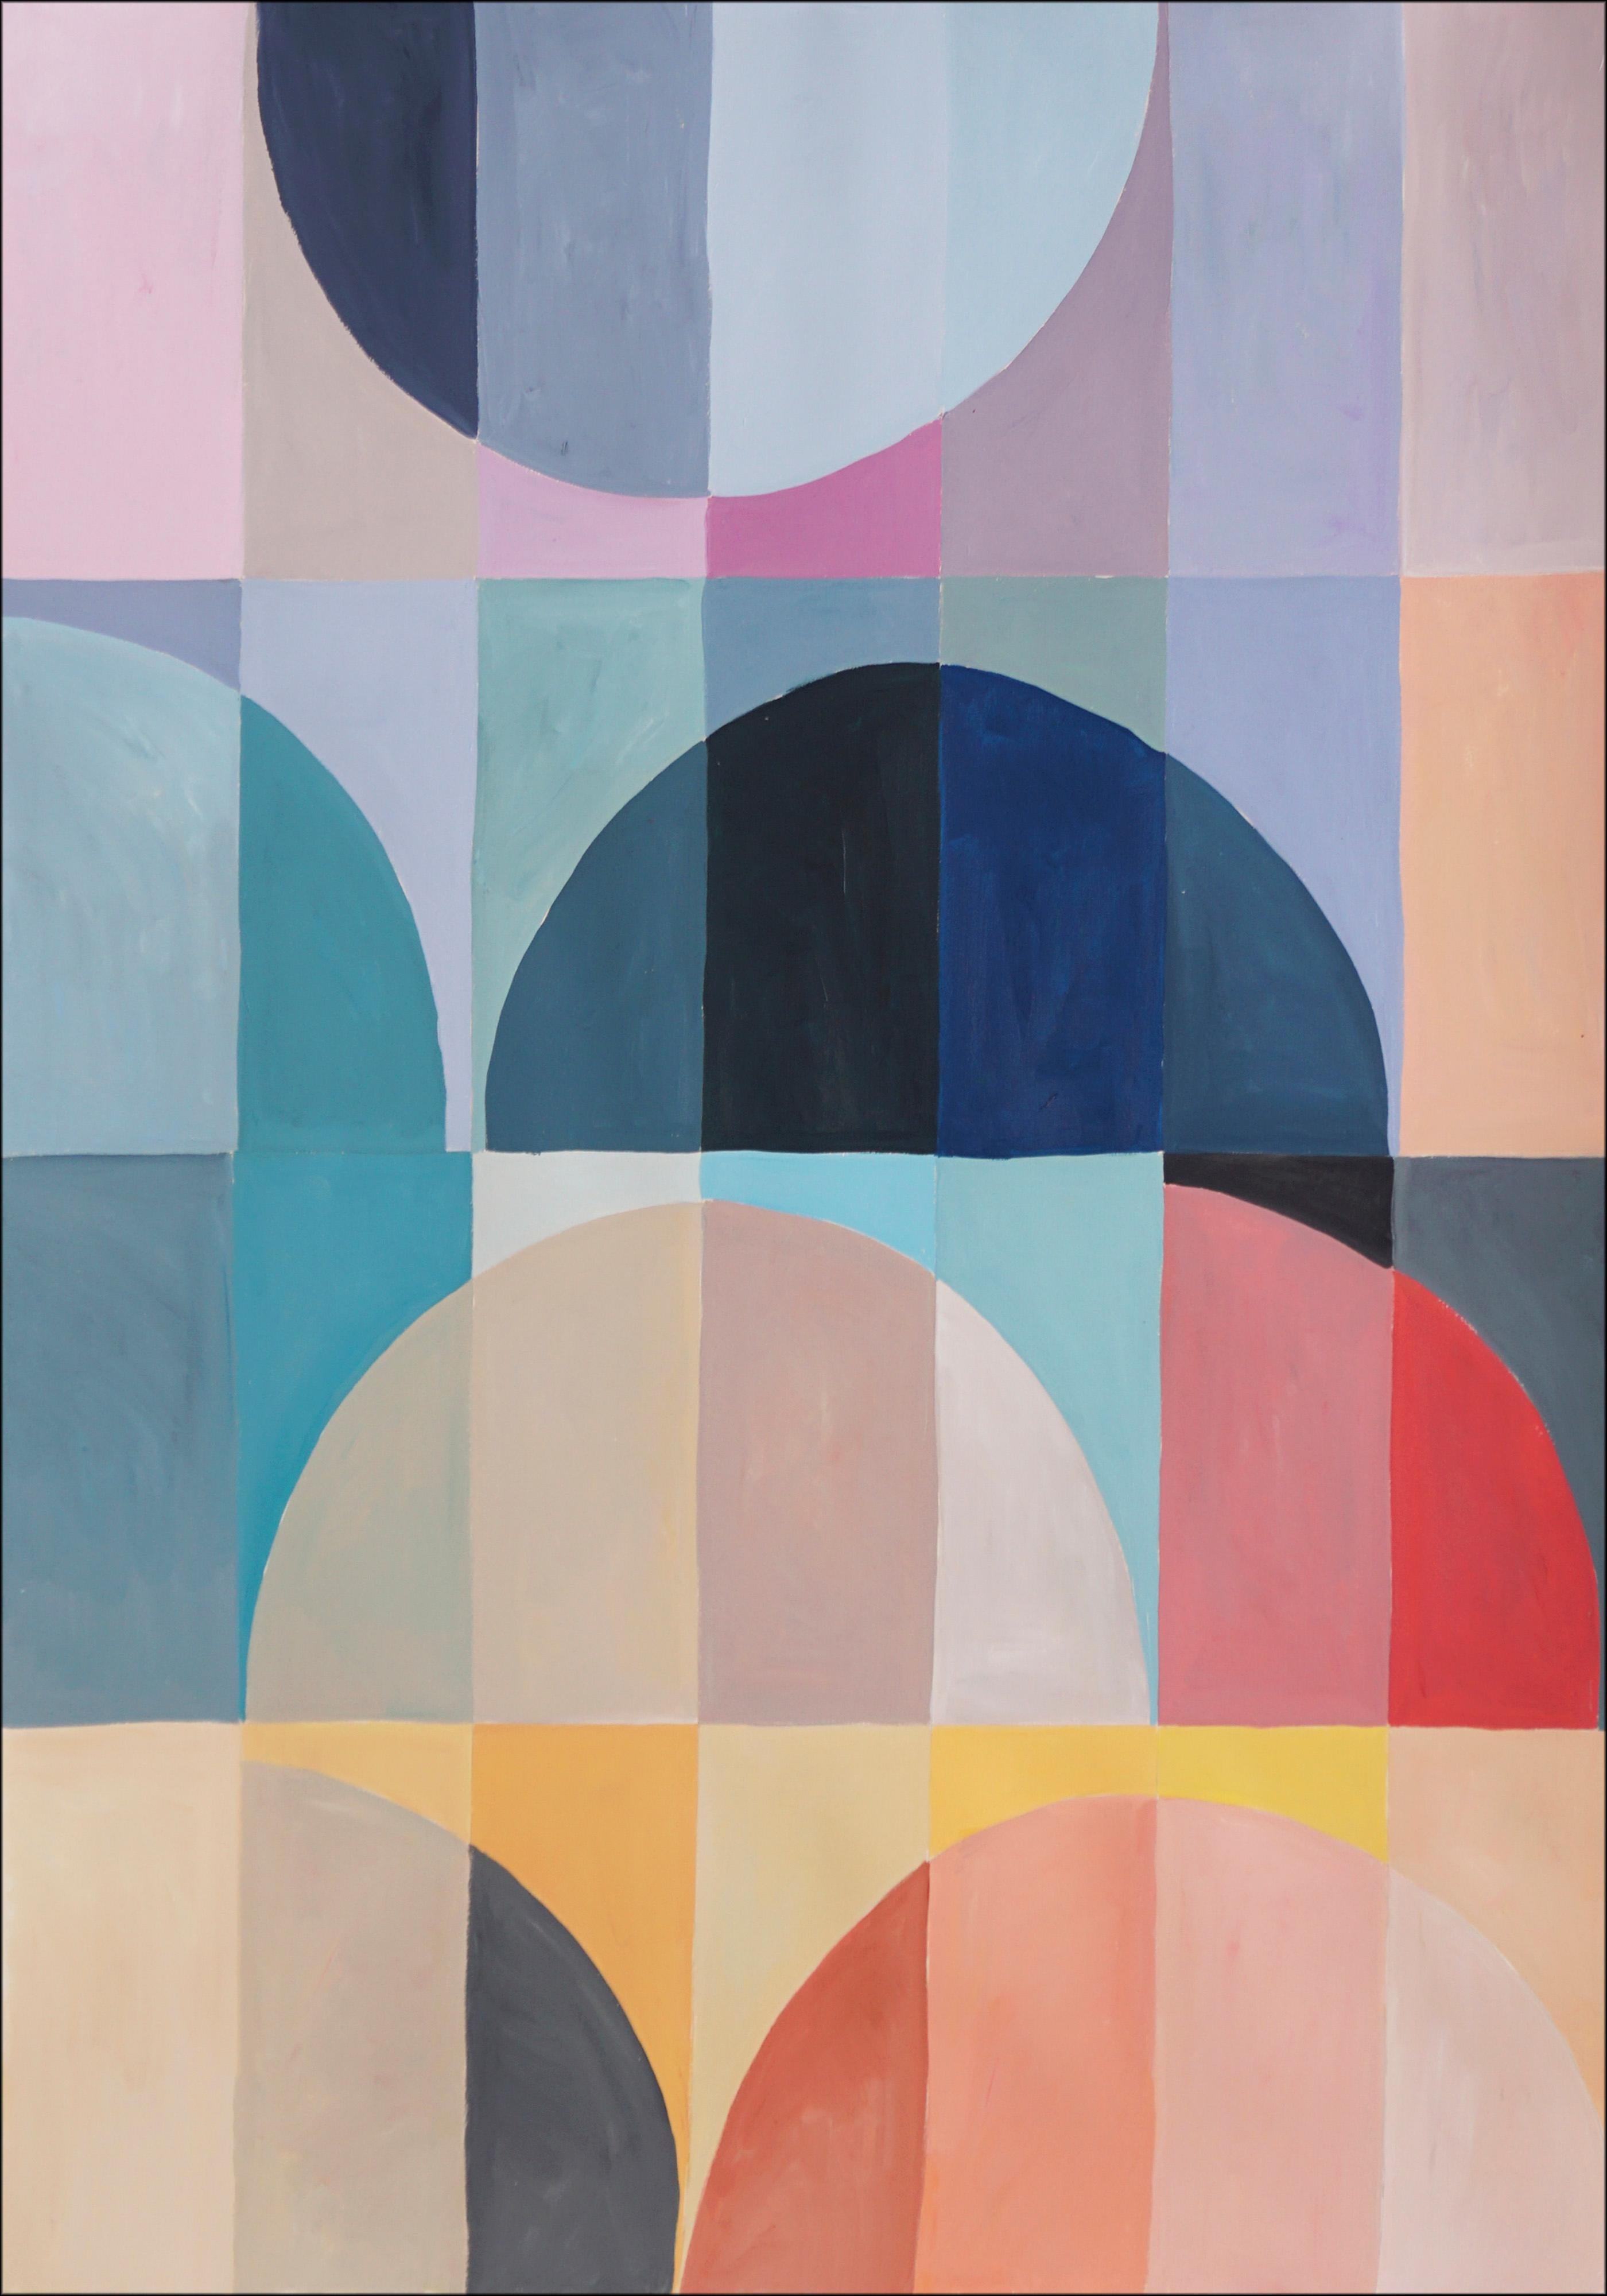 Natalia Roman Landscape Painting - Deconstructed Gems, Abstract Geometric Primary Tones Transitions, Vertical Grid